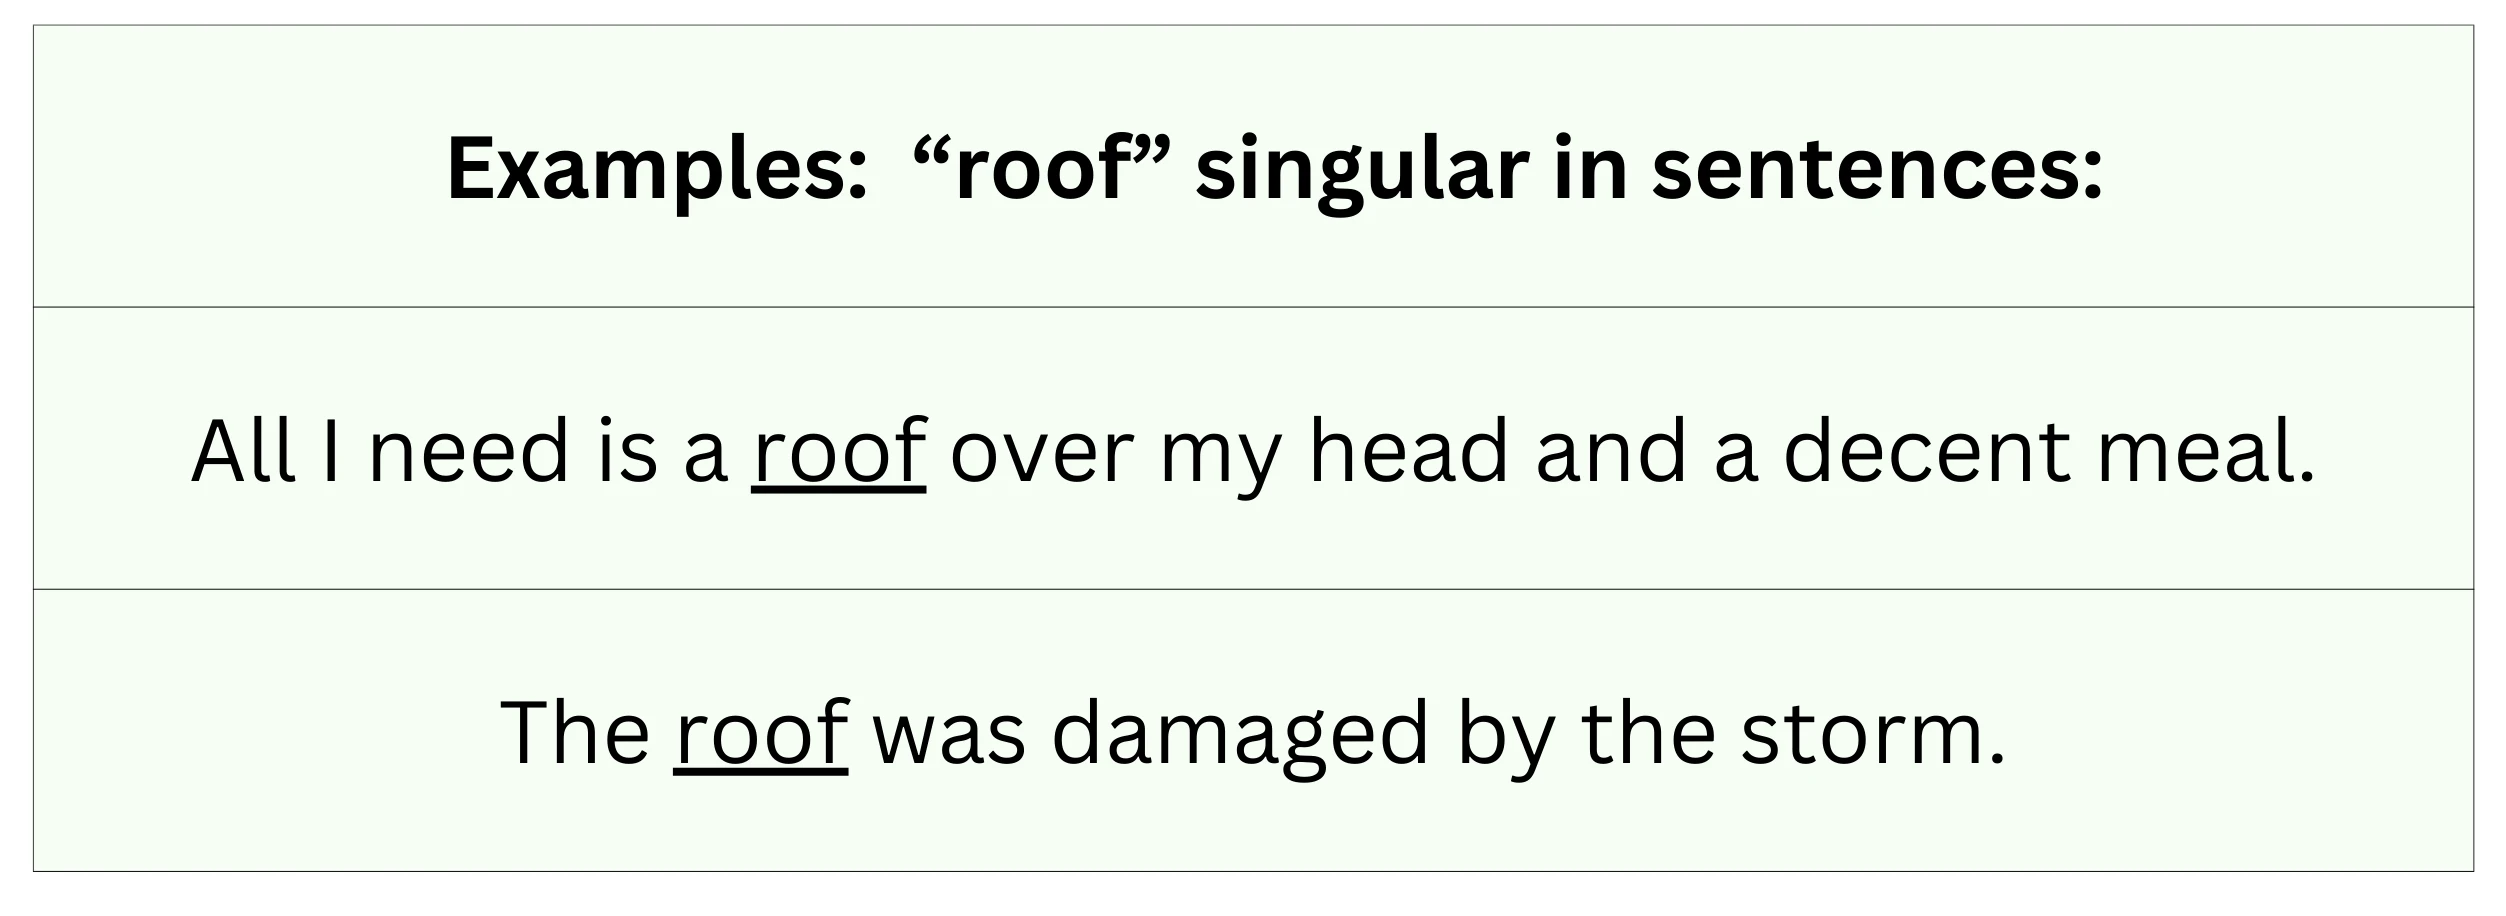 "Roof" in sentence examples.